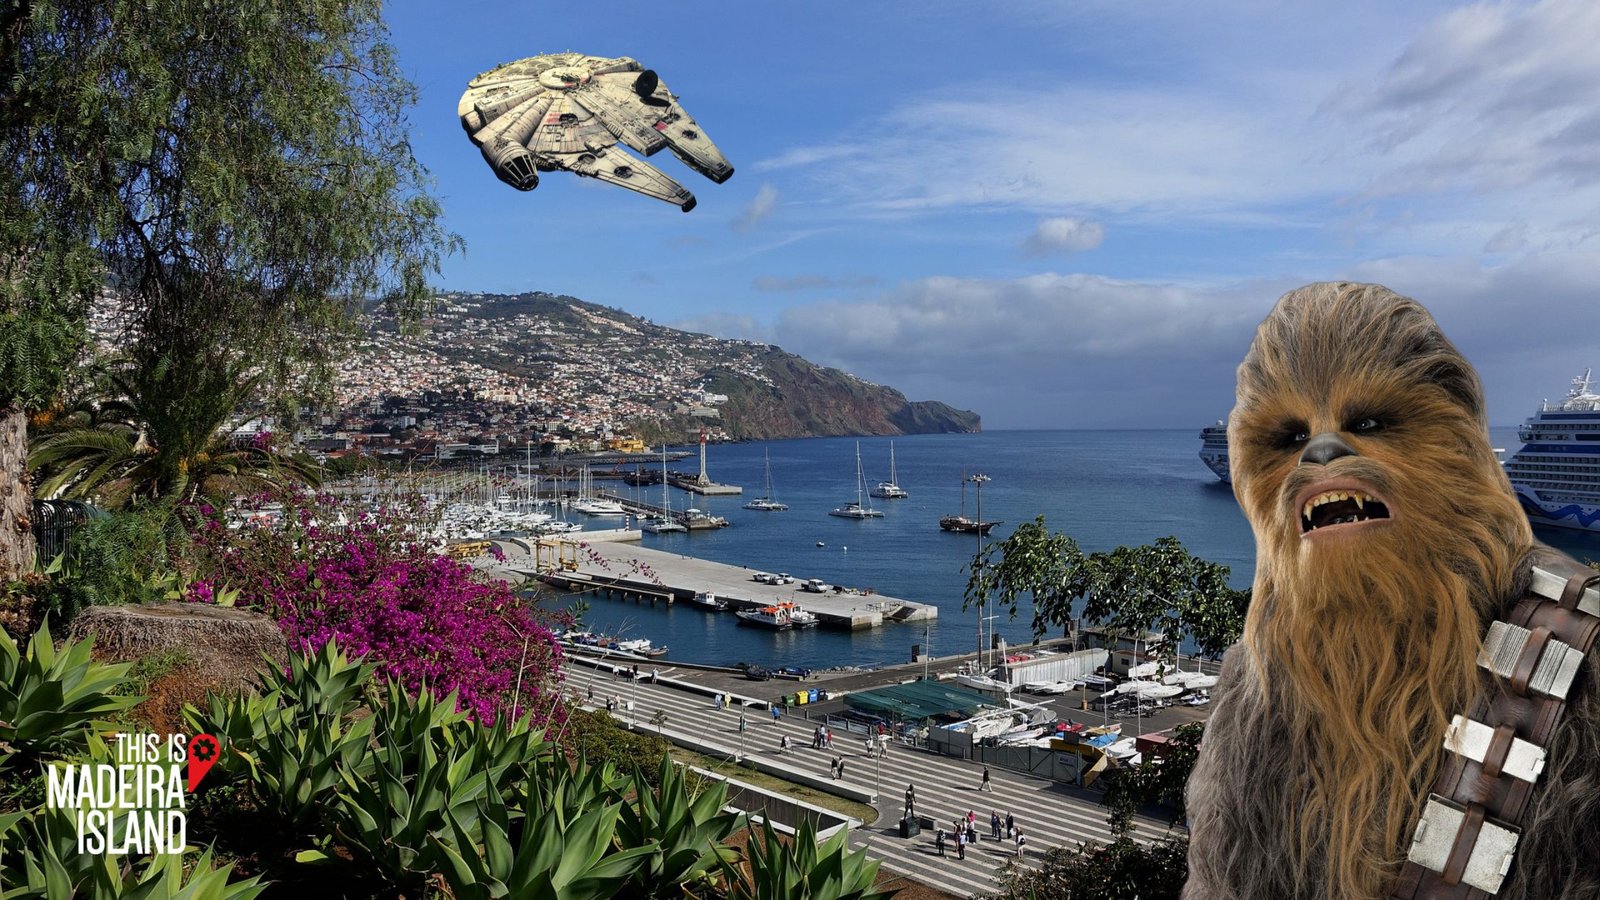 Star Wars – Star Wars recorded in Madeira with impressive logistics